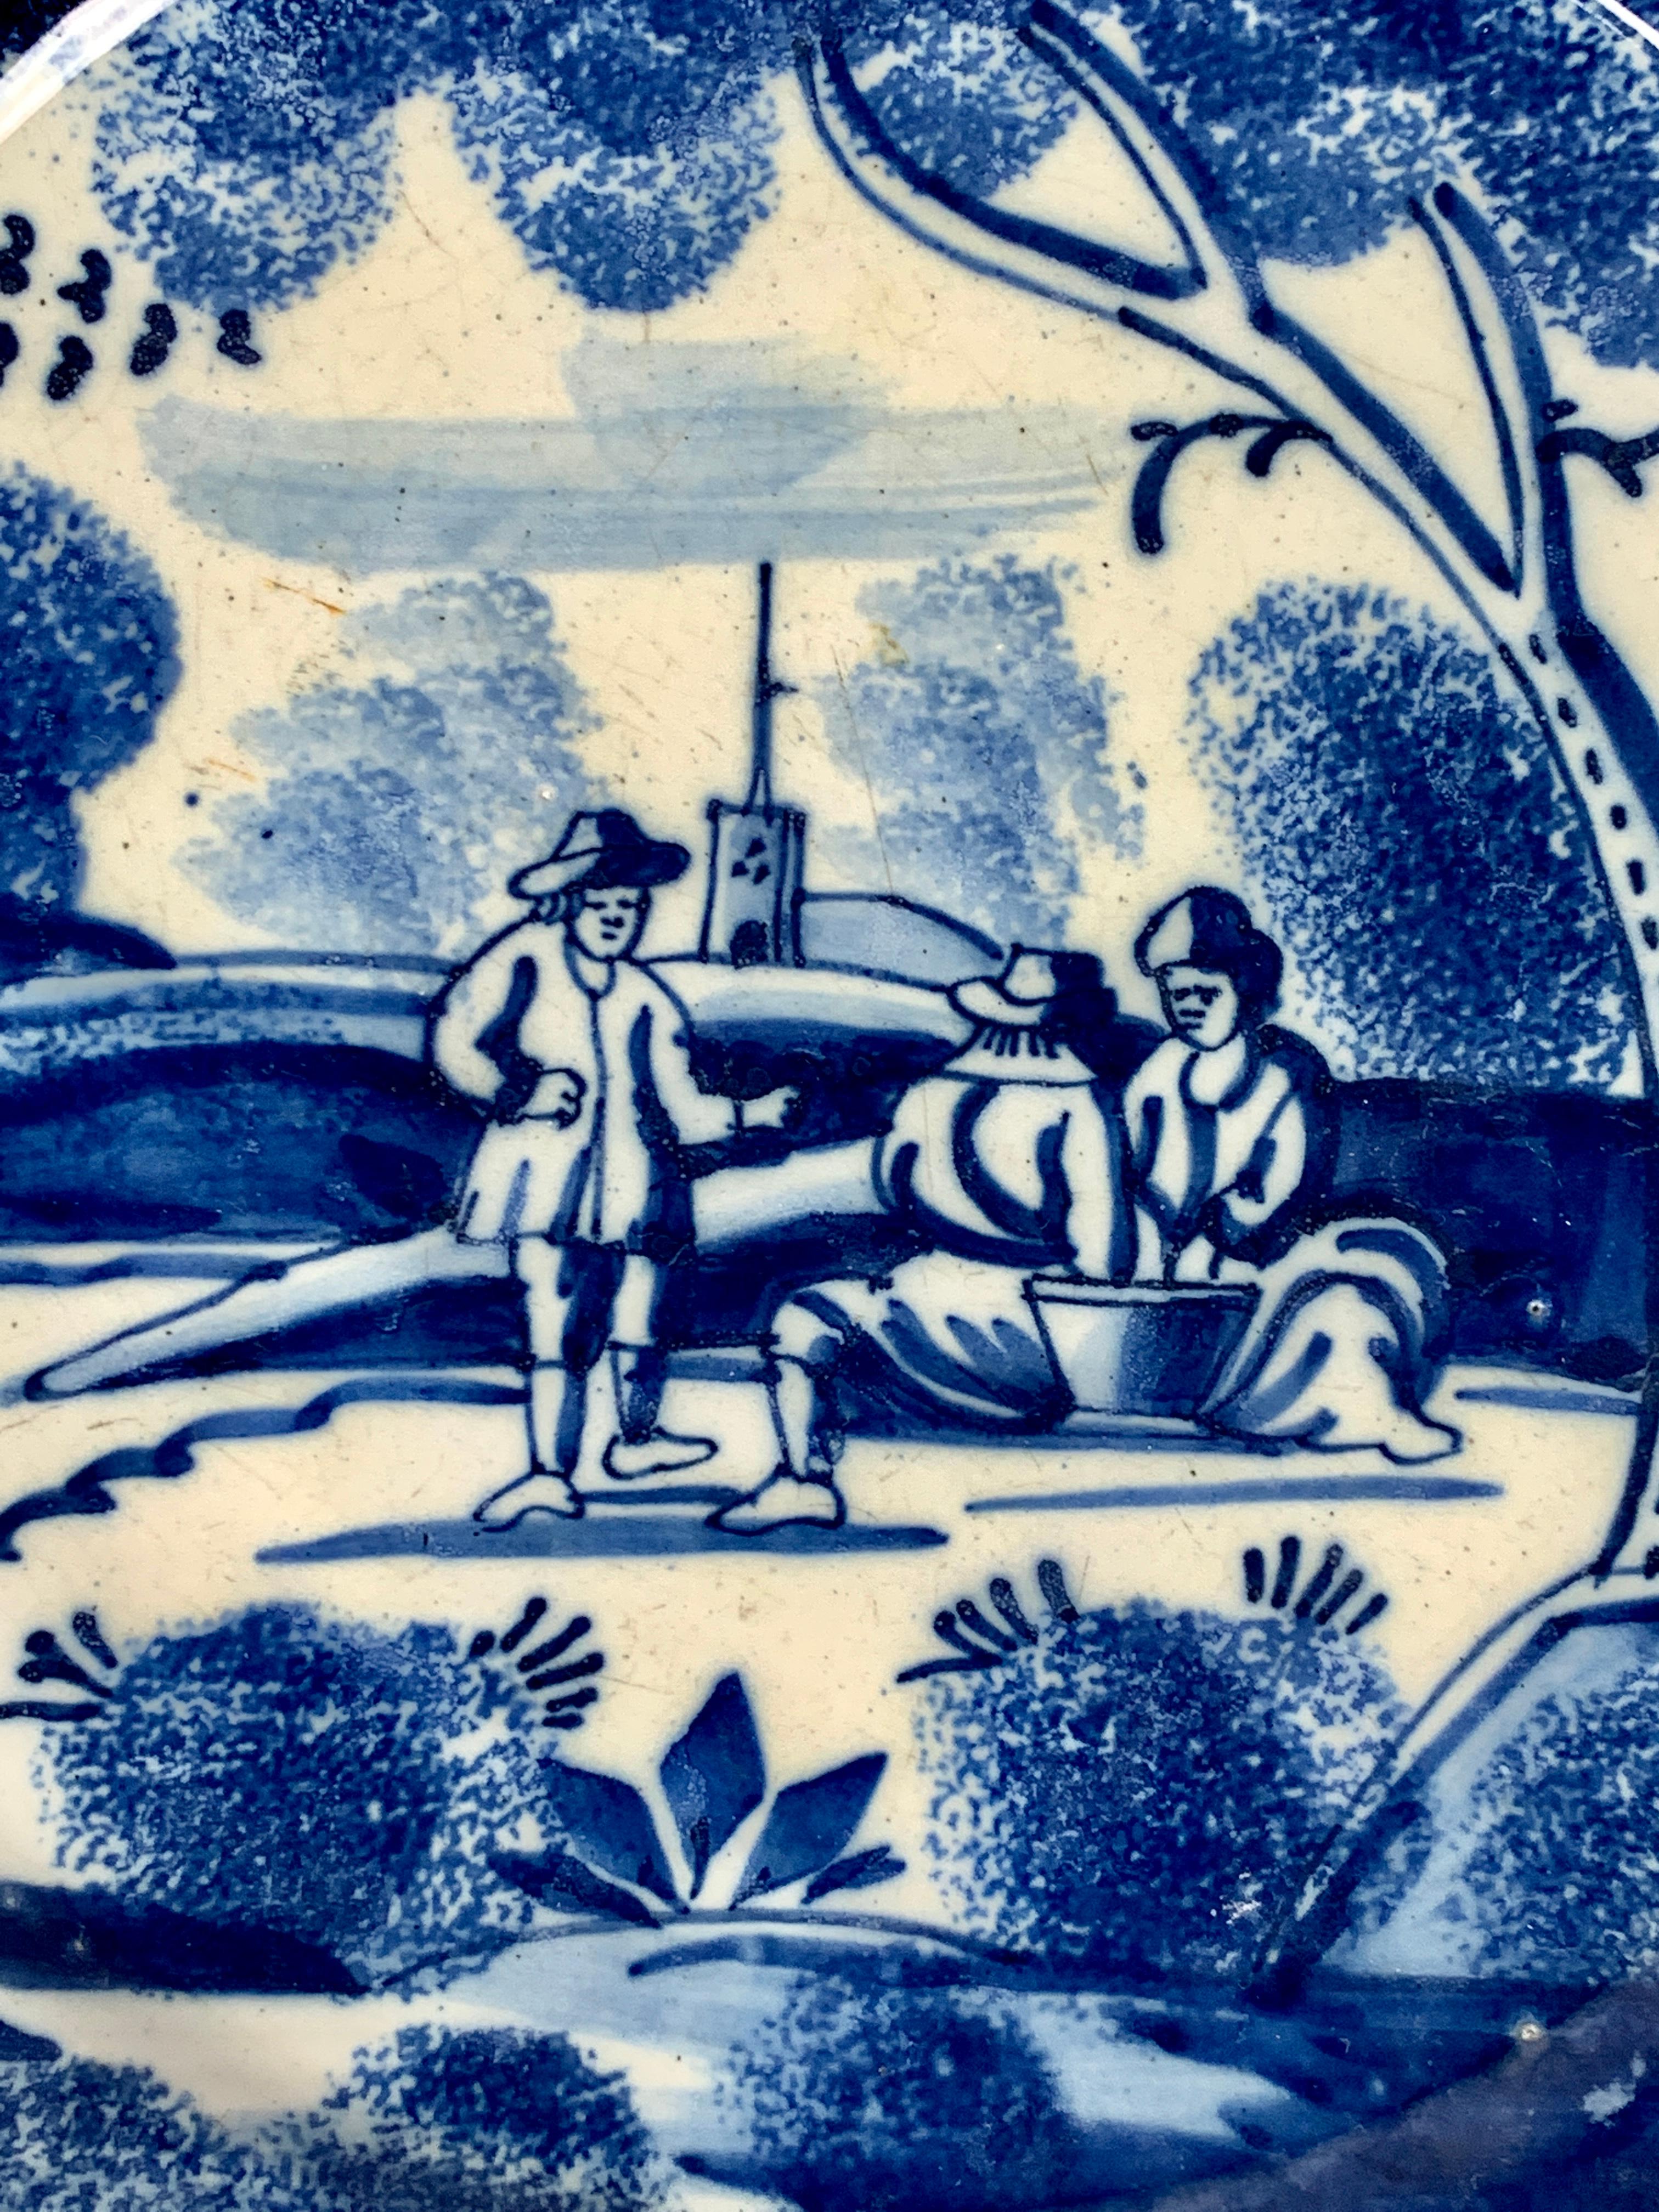 Made circa 1730-40, this 18th century Dutch Delft dish is hand-painted in cobalt blue. It is decorated with exceptional blue and white sponge work. The scene shows three Dutchmen in the countryside. The seated pair seem to be playing cards while the